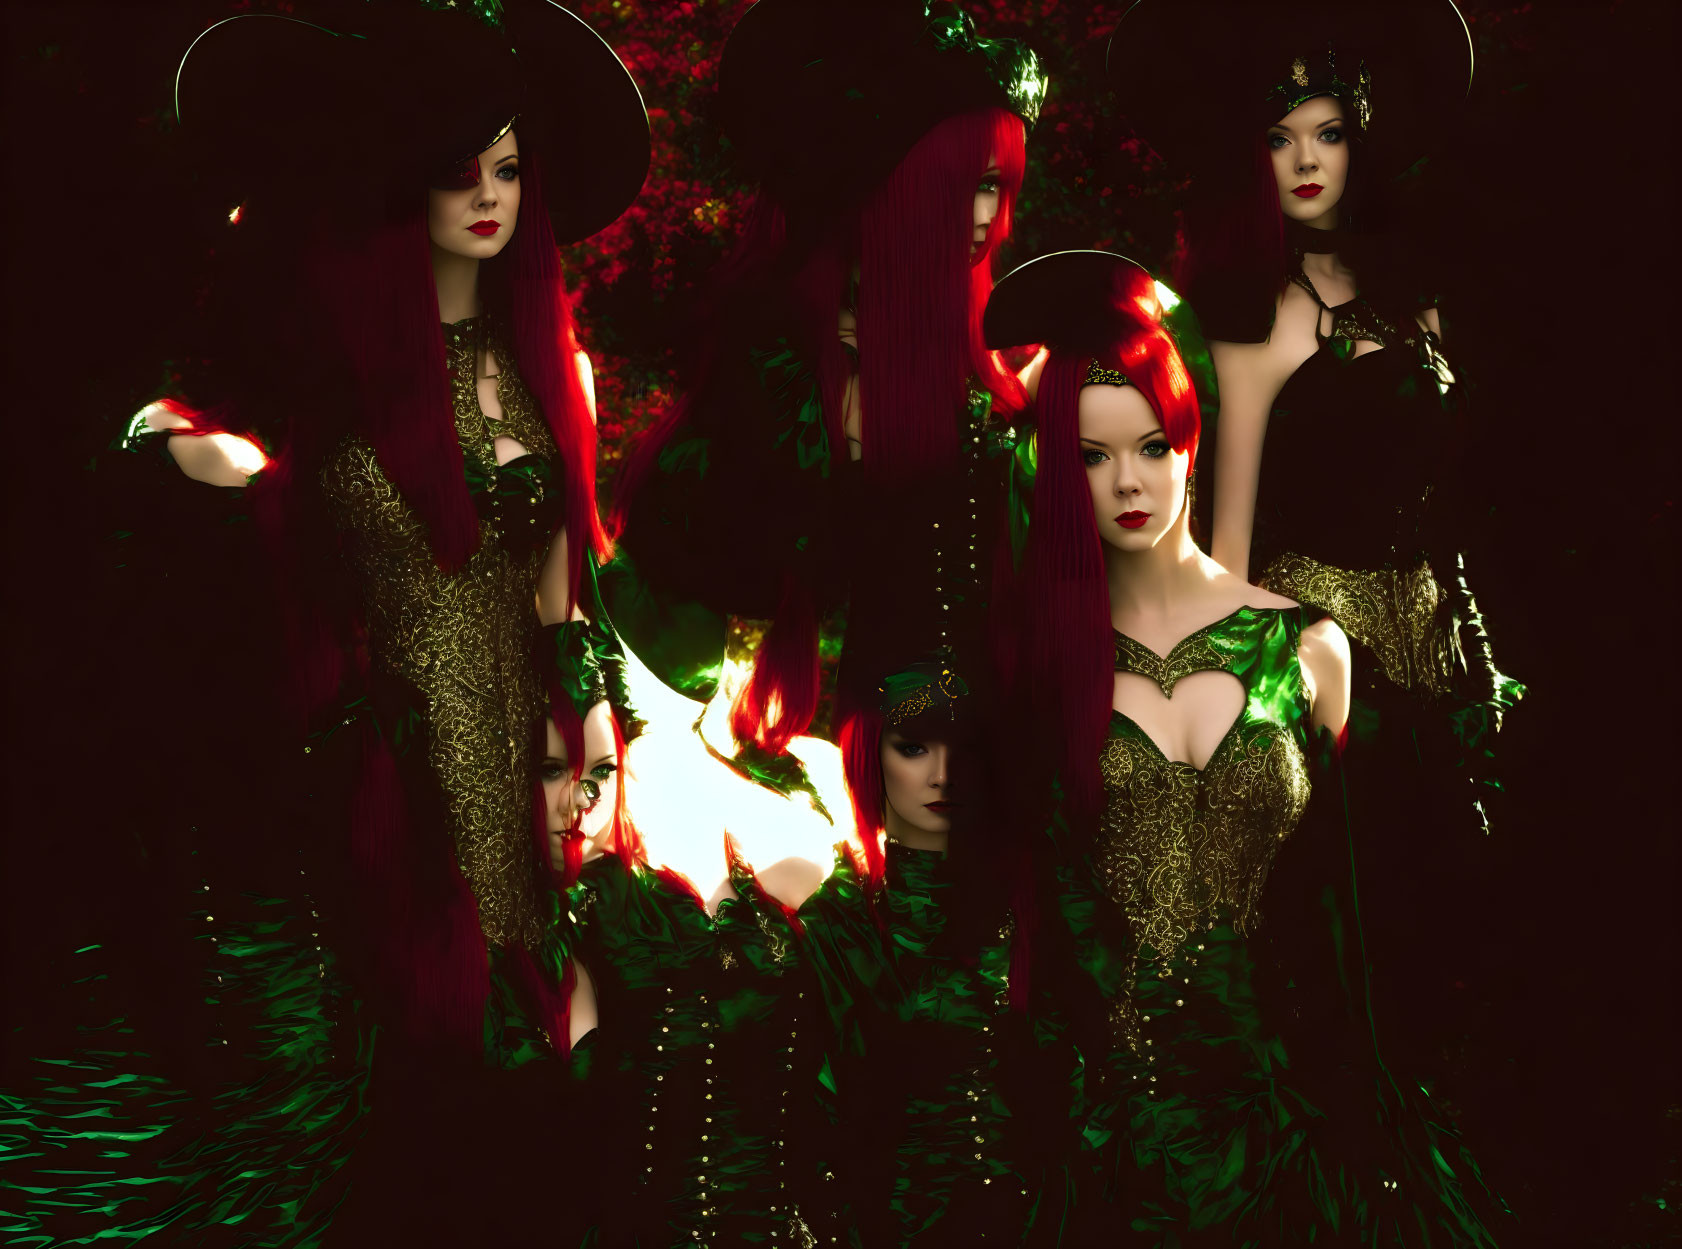 Stylized red-haired women in mystical forest wearing green and gold dresses